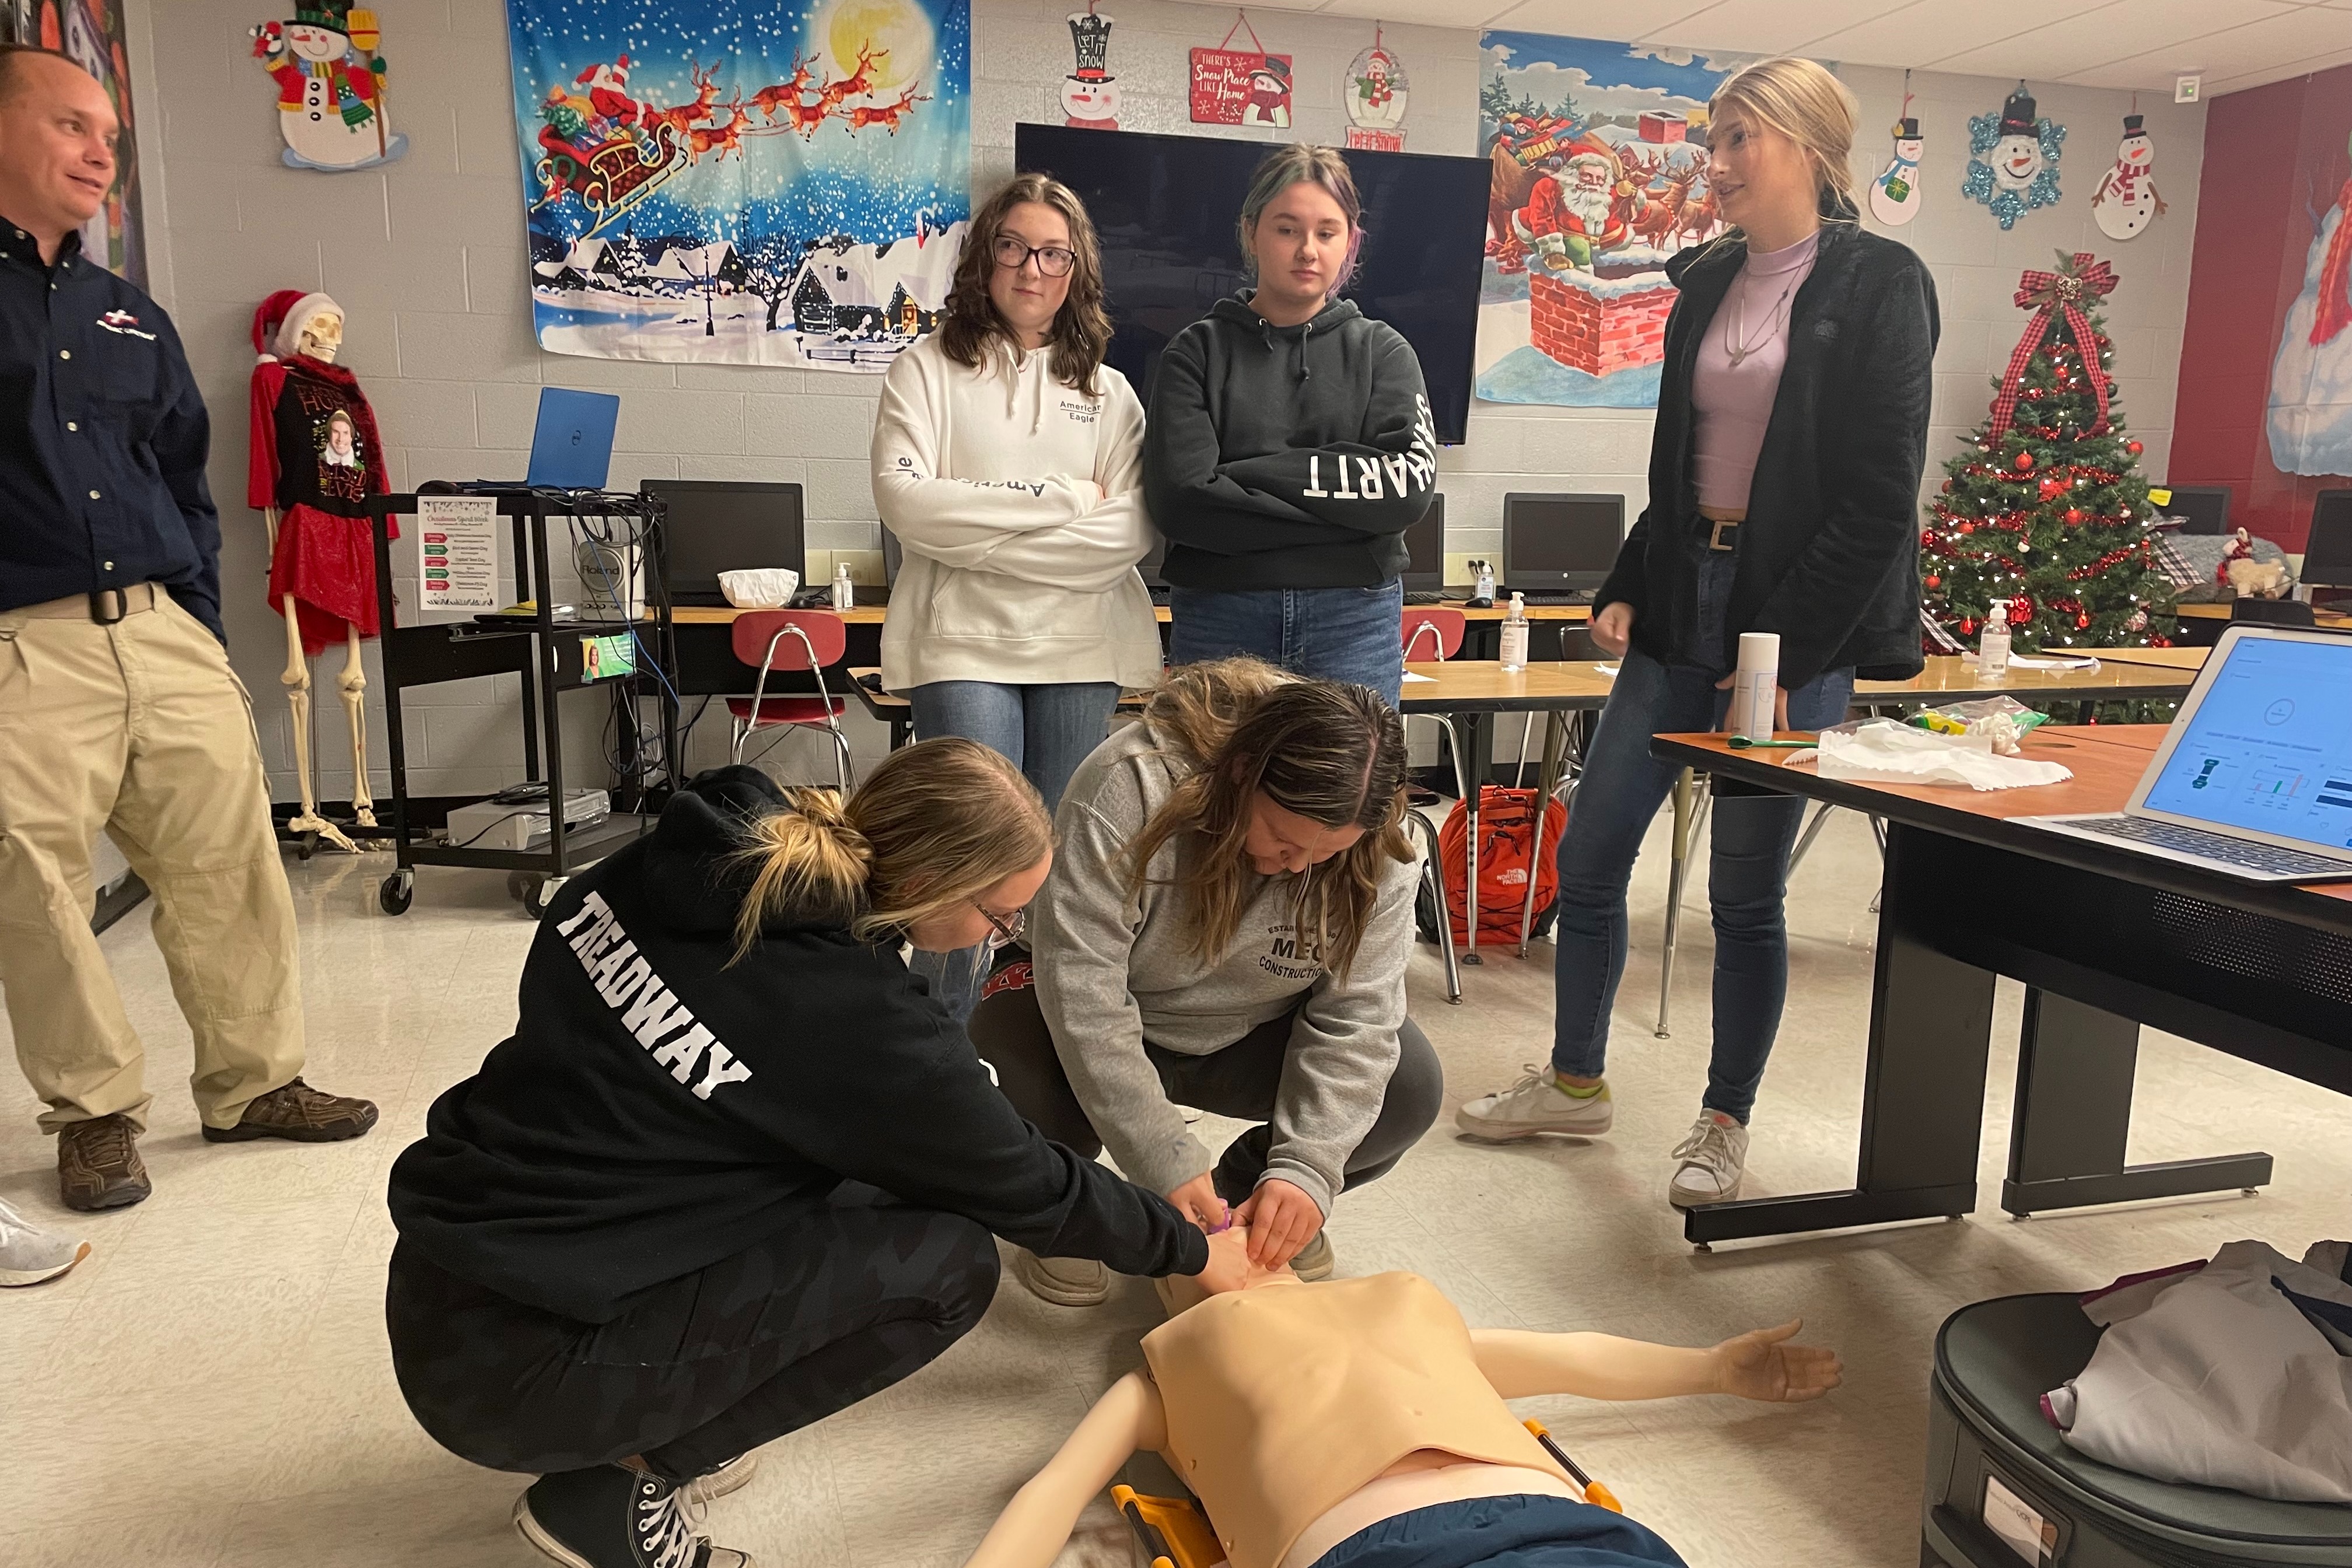 Highlander Health Science students work on airway management manikins and learn to use the life-saving LUCAS device